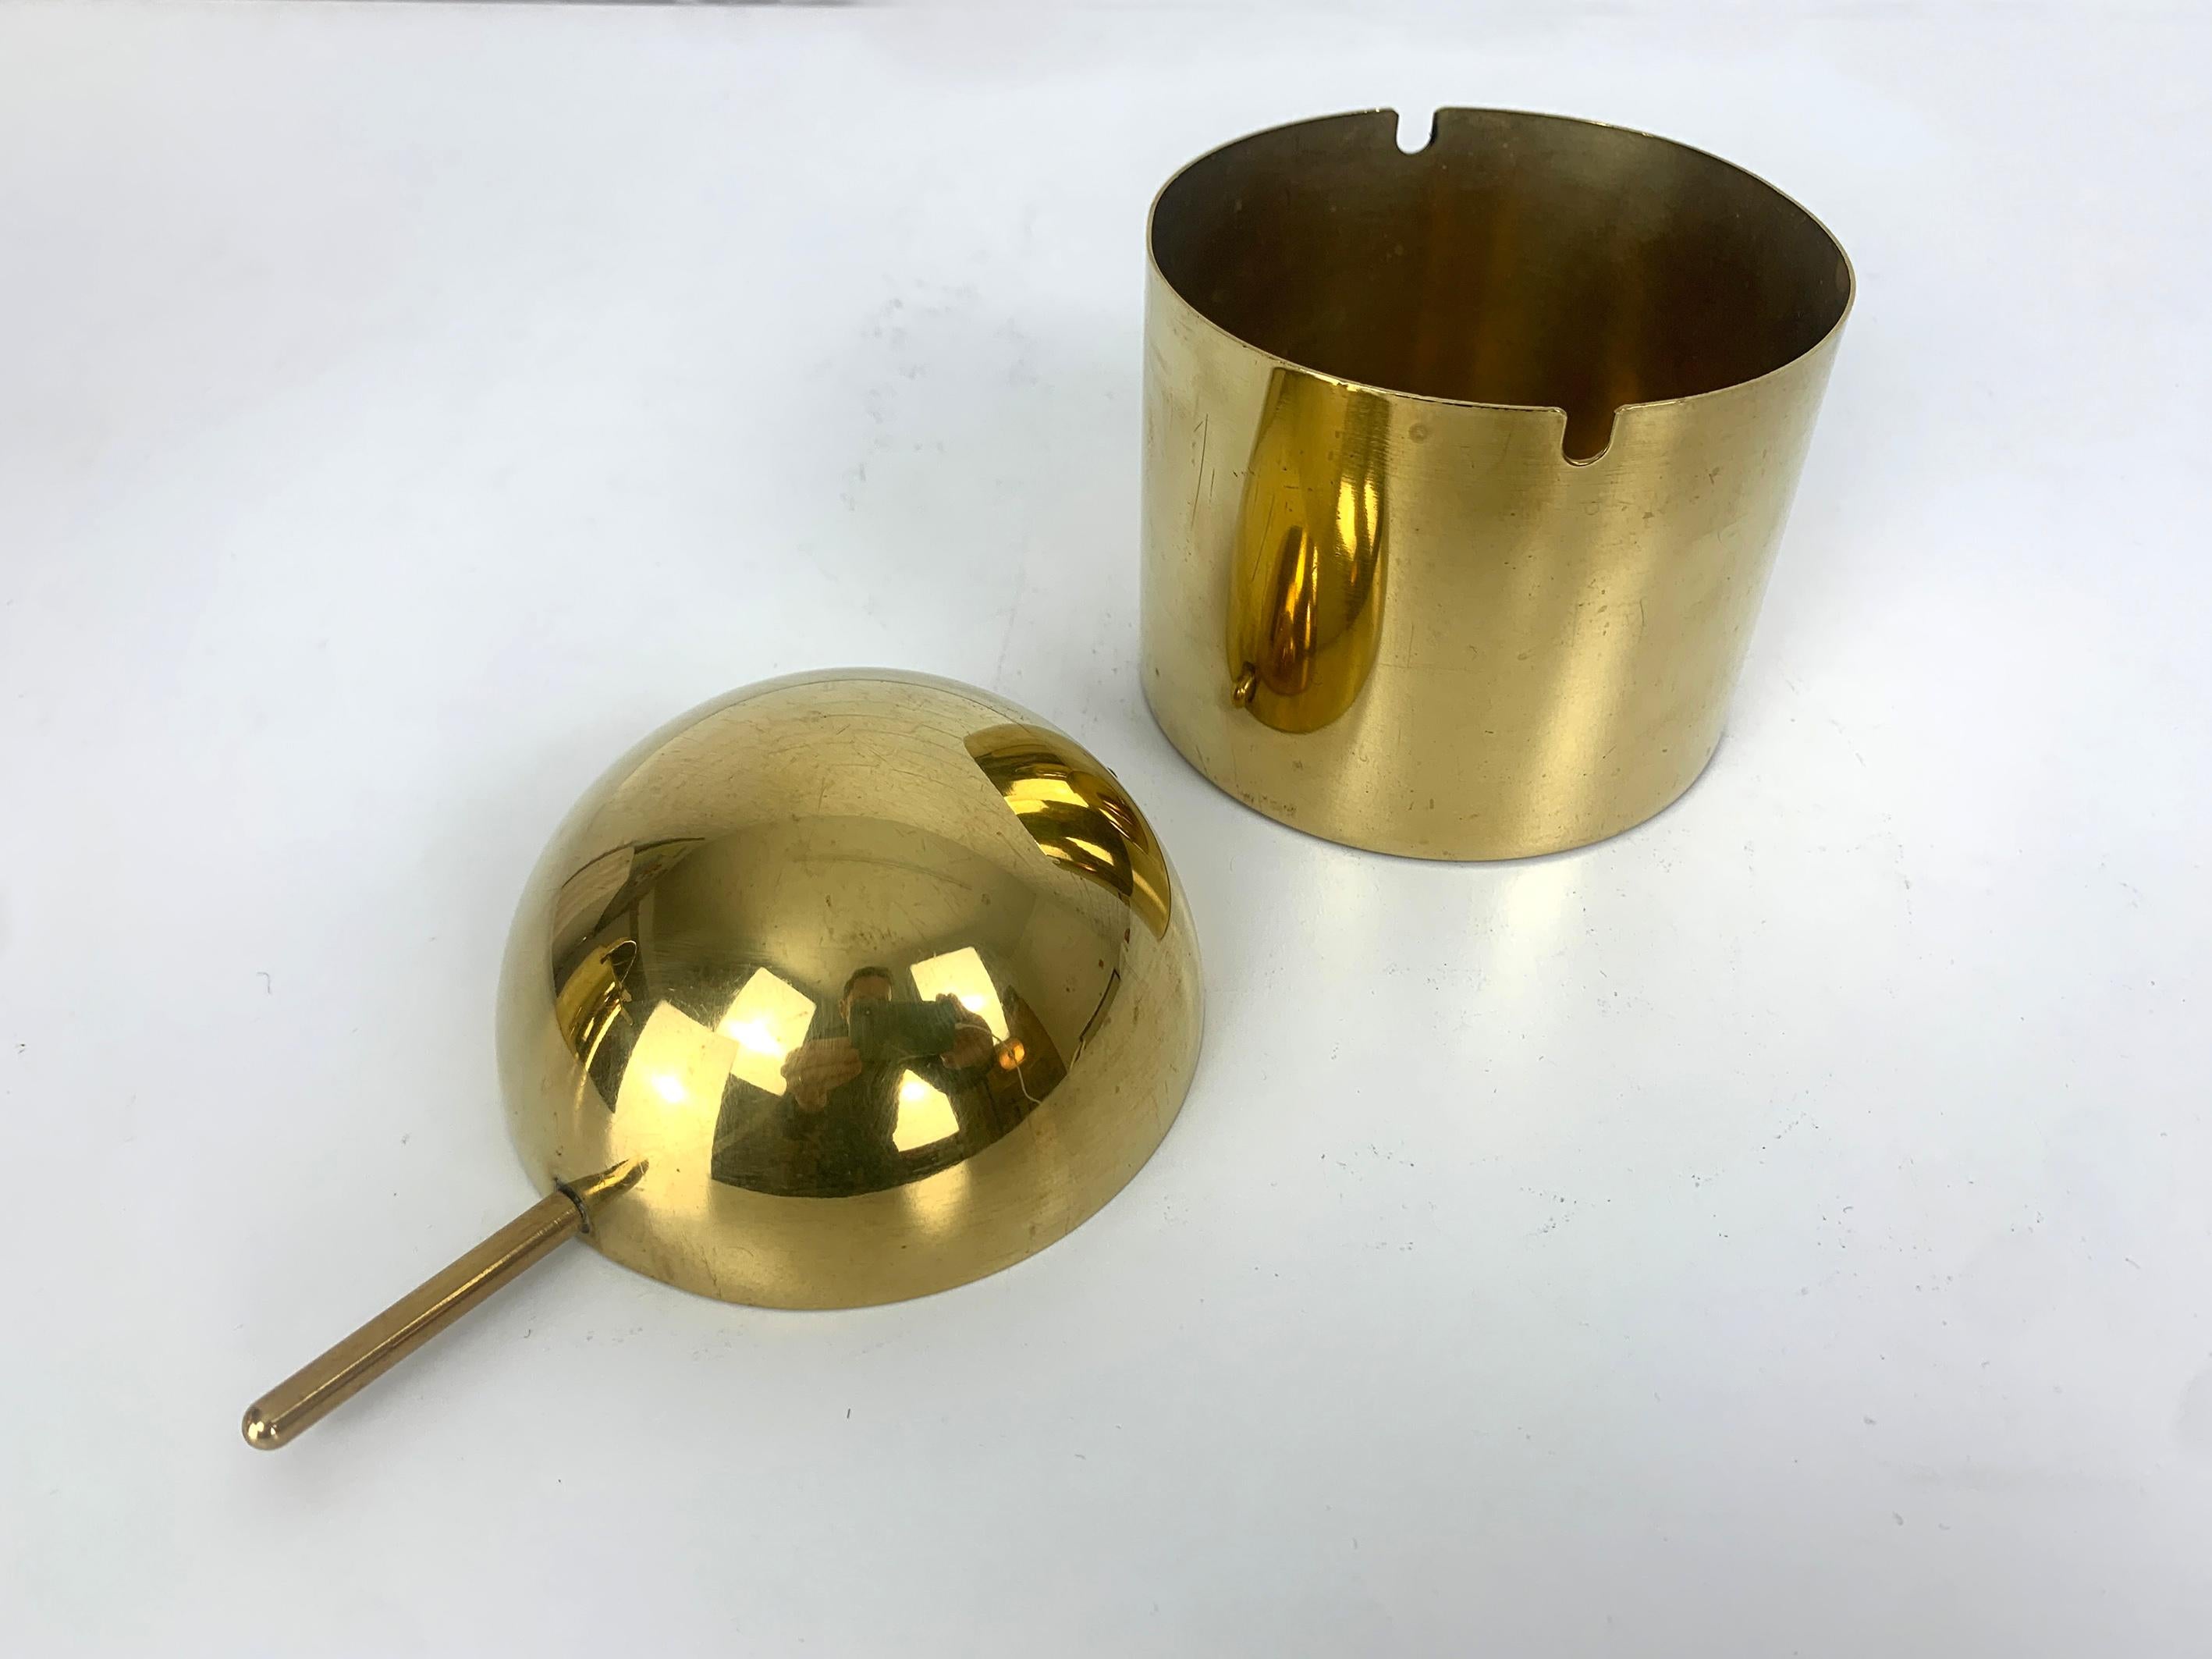 Large Brass Ashtray by Arne Jacobsen for Stelton, Cylinda-Line, 1960s In Good Condition For Sale In Vorst, BE